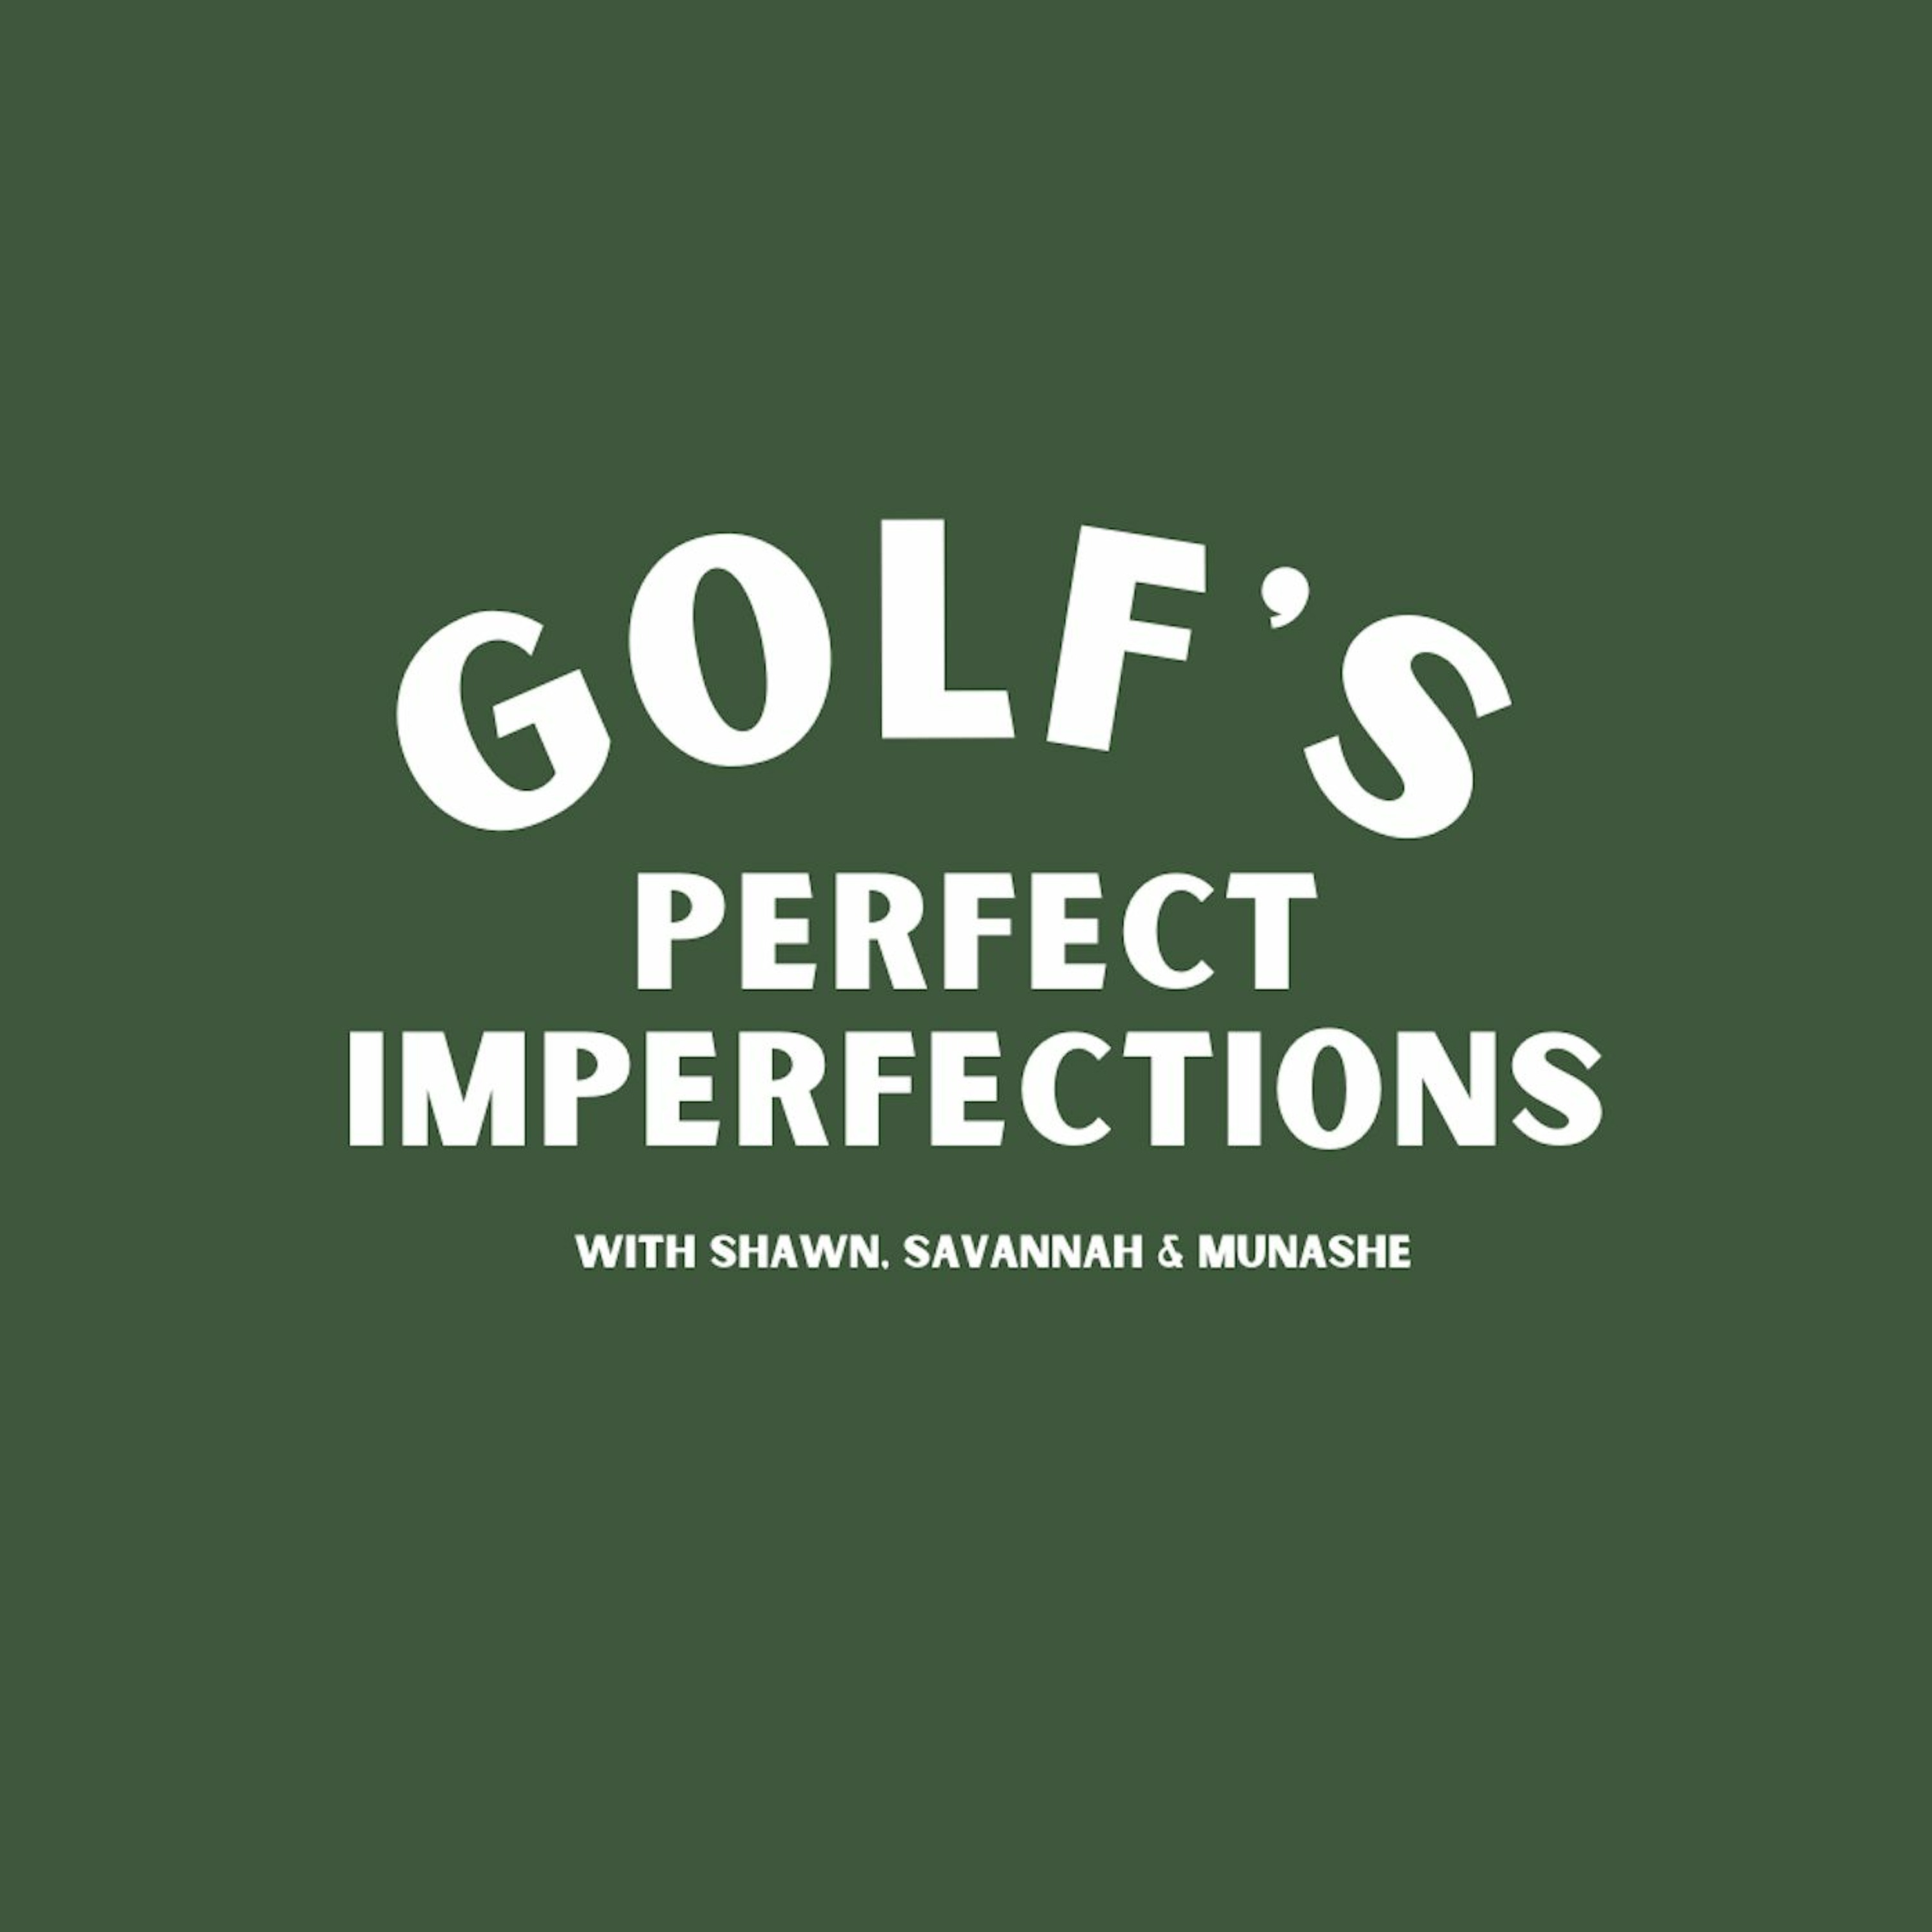 Golf's Perfect Imperfections: A Nice Next-Level Analogy and Task